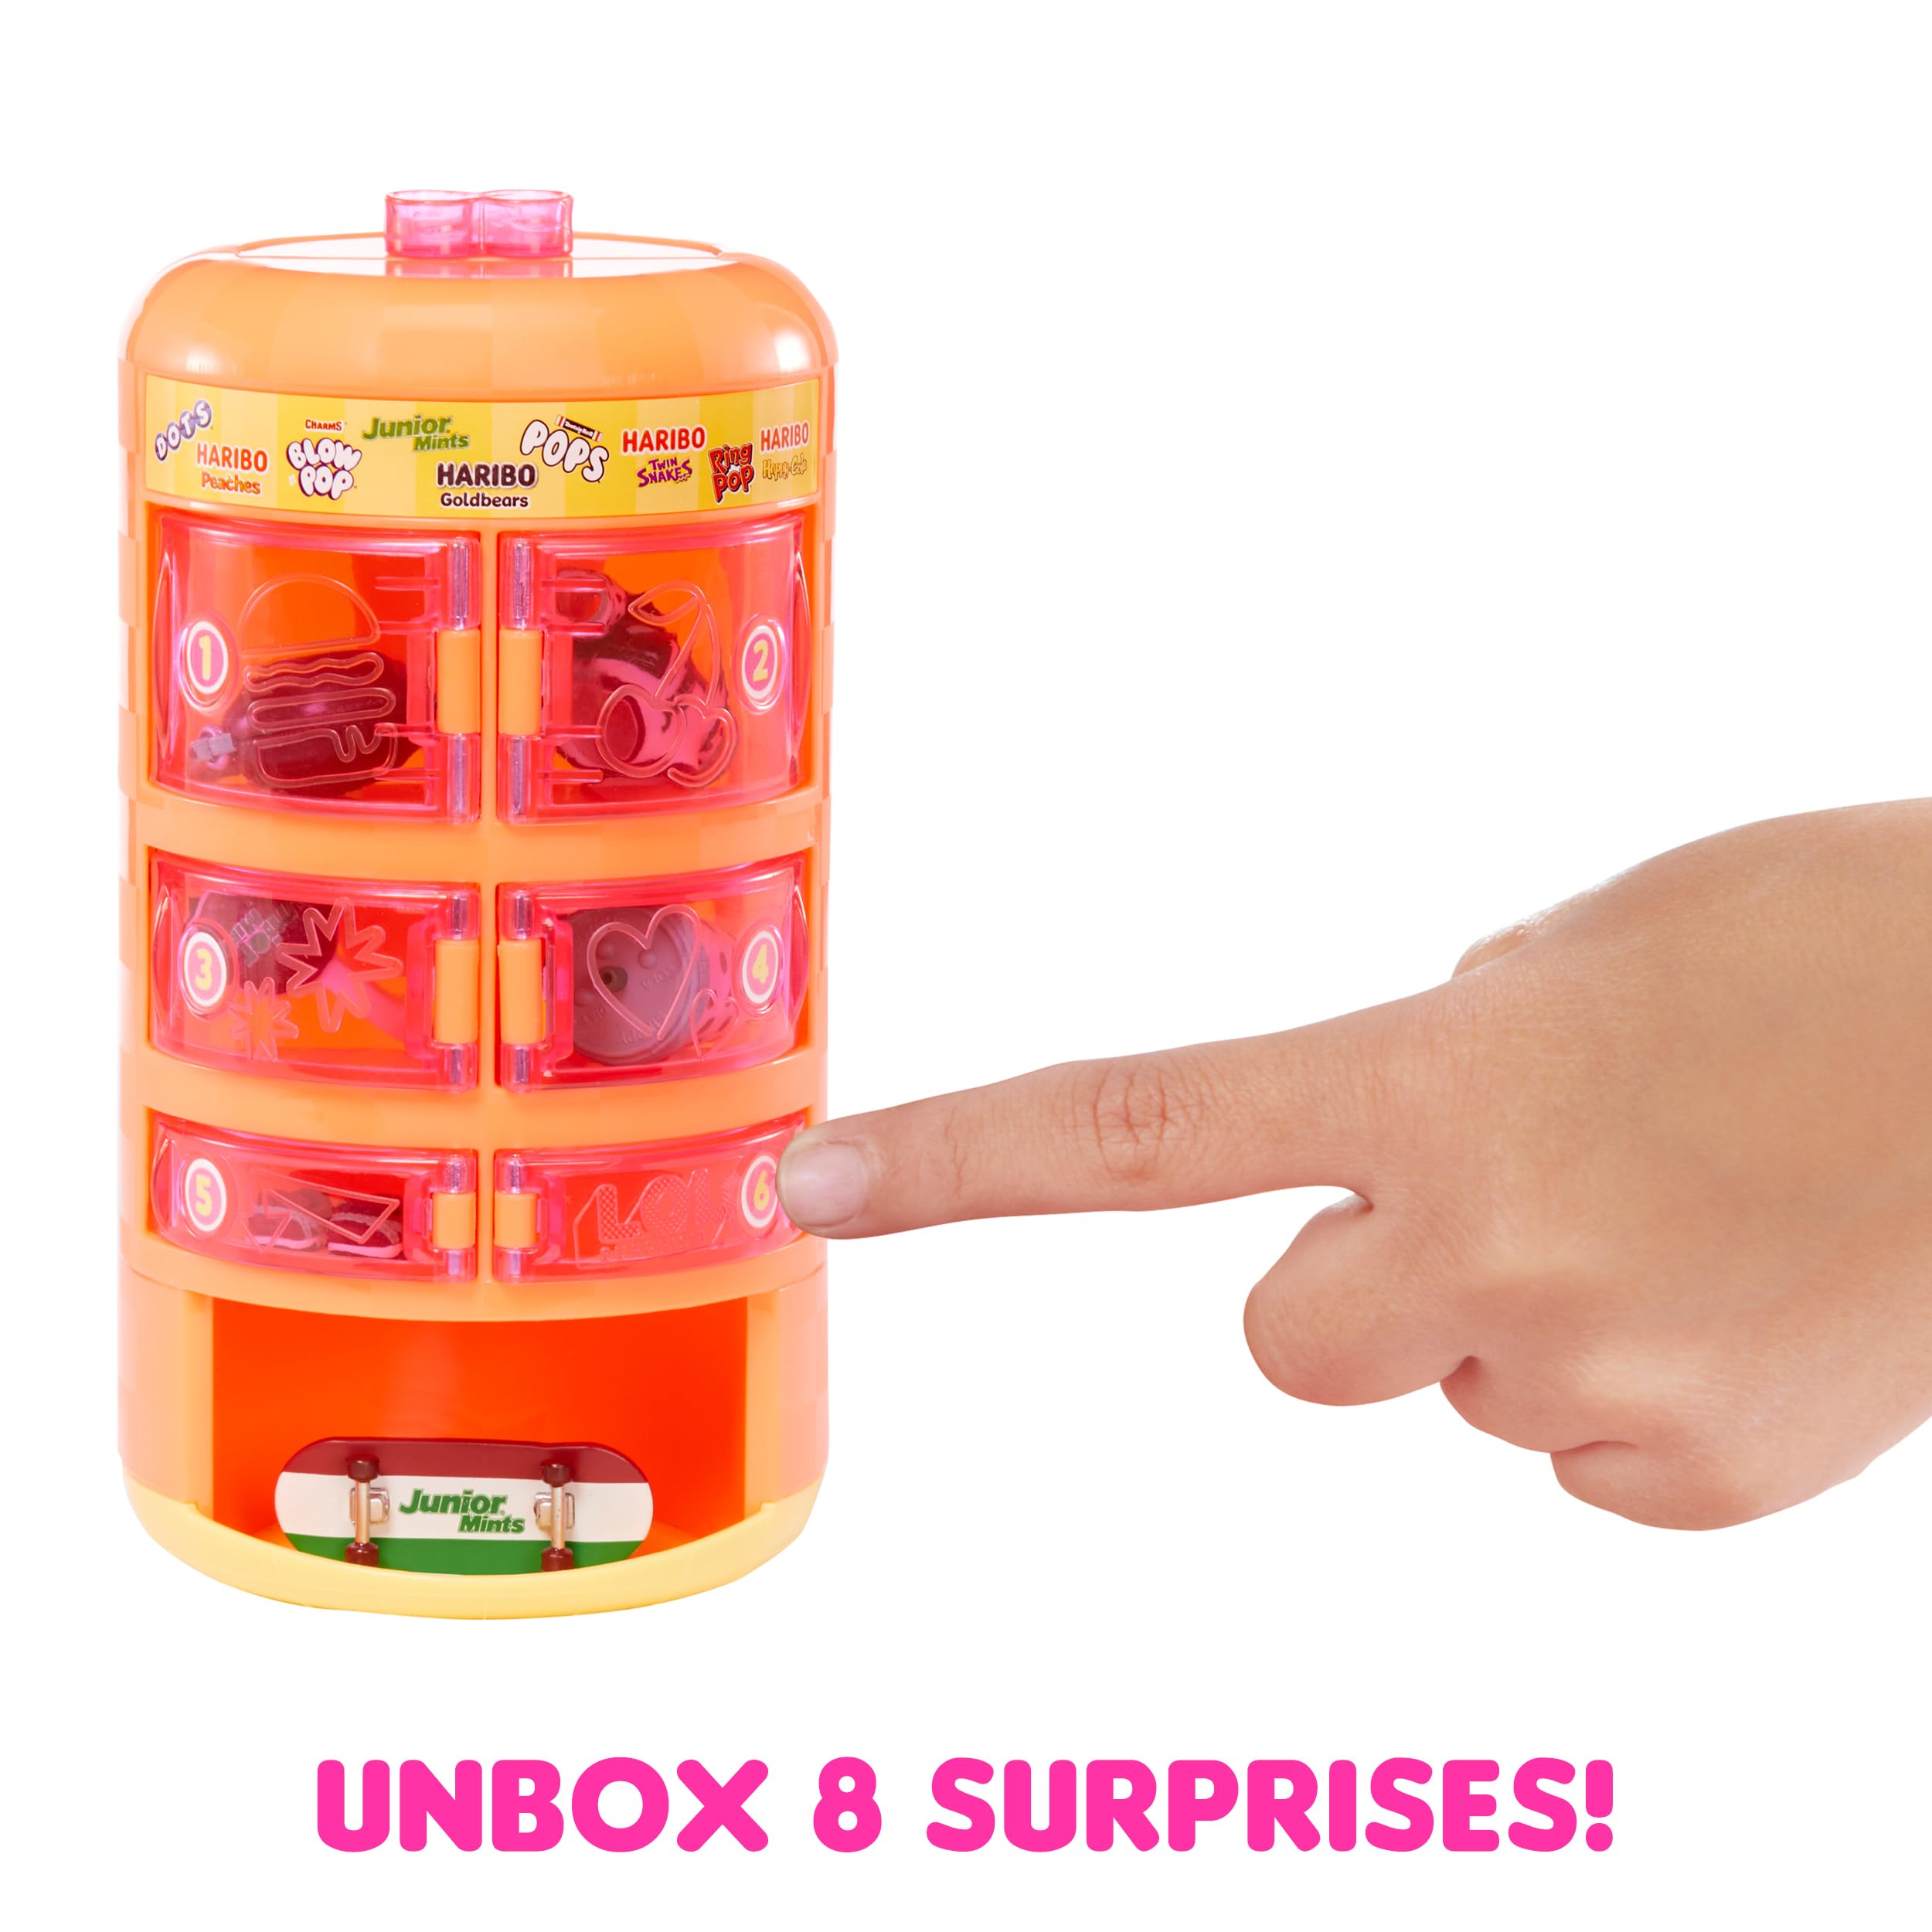 LOL Surprise Loves Mini Sweets Series 3 Vending Machine with 8 Surprises, Accessories, Vending Machine Packaging, Limited Edition Doll, Candy Theme, Collectible Doll- Great Gift for Girls Age 4+